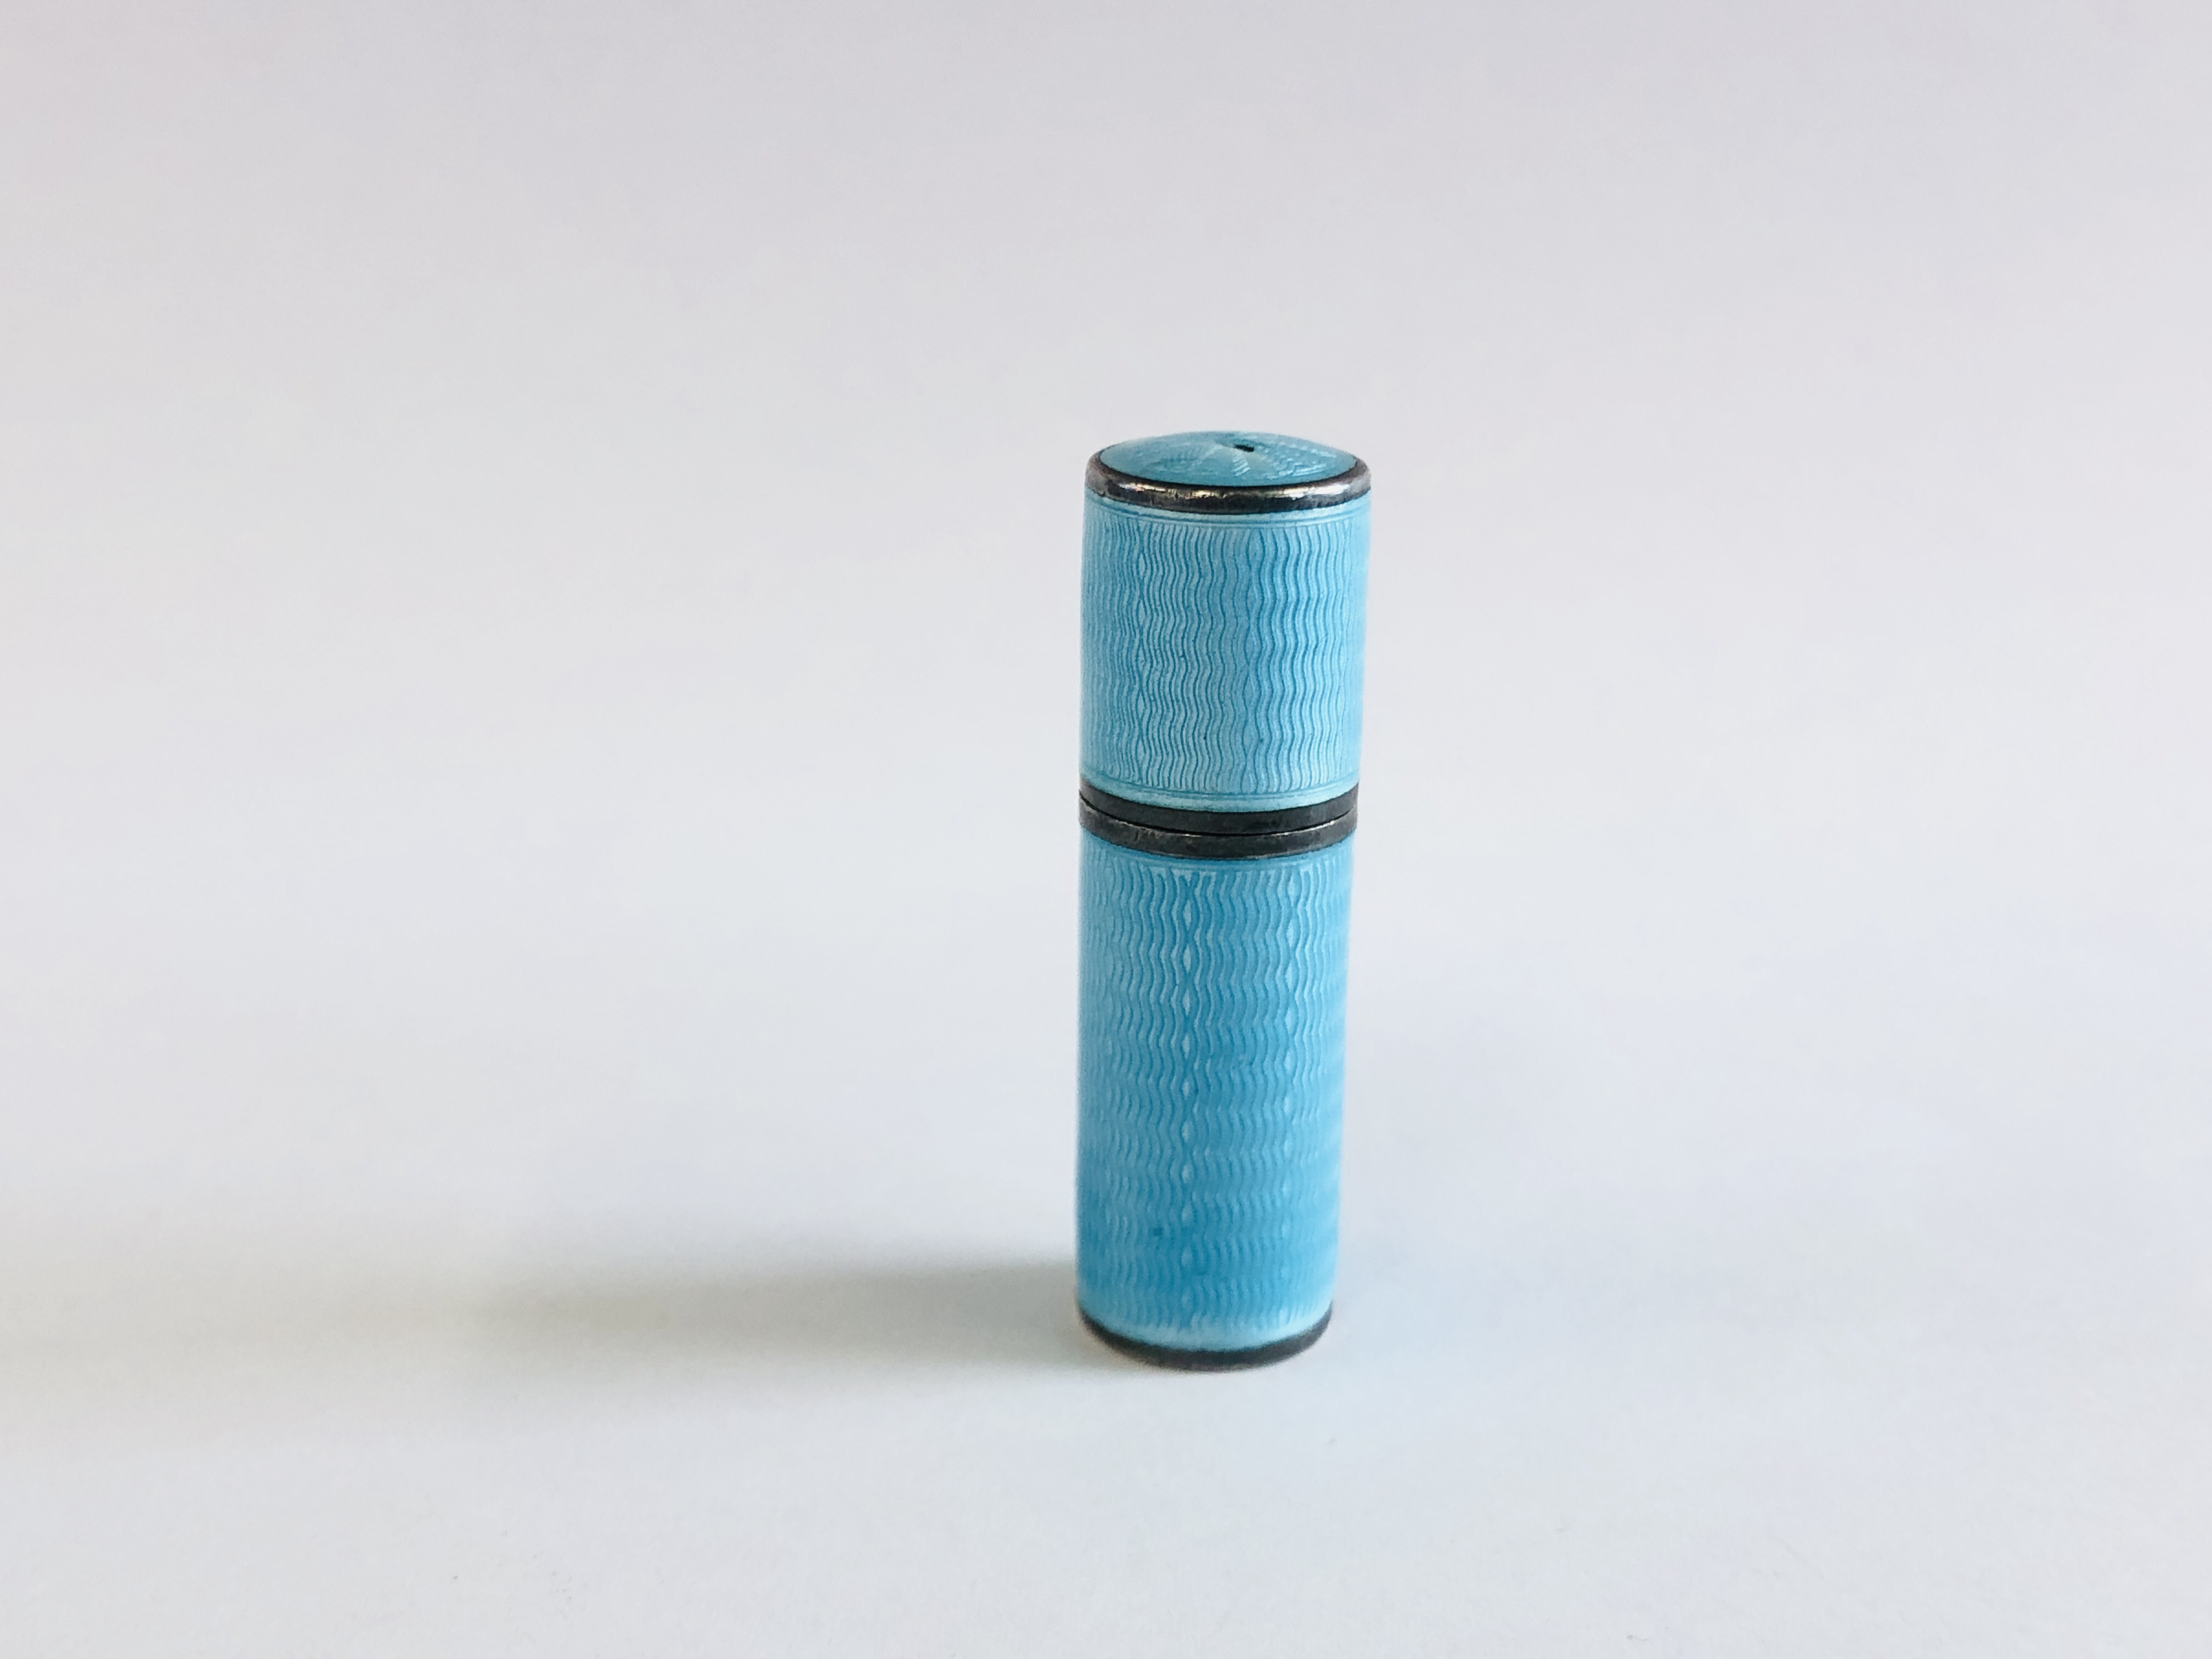 A VINTAGE ENAMELED SILVER CYLINDRICAL THREADED SCENT BOTTLE HOLDER CONTAINING A CLEAR GLASS SCENT